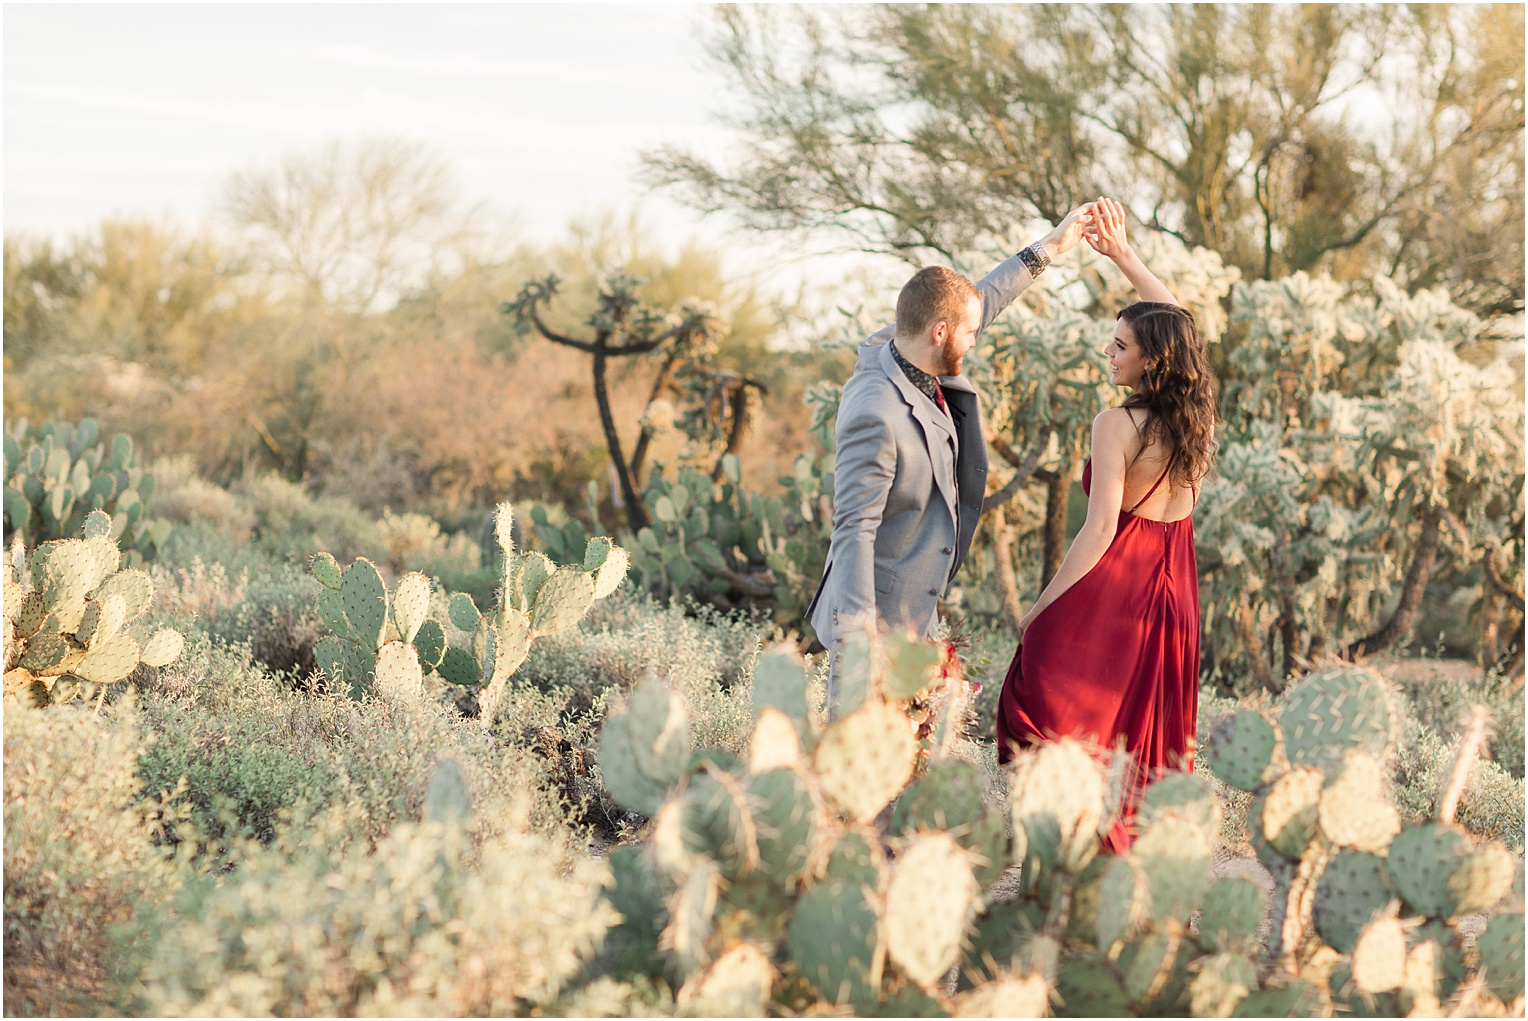 Burgundy and Grey Outfits for Arizona Desert Engagement Pictures Tucson, AZ Morgan + Louie 